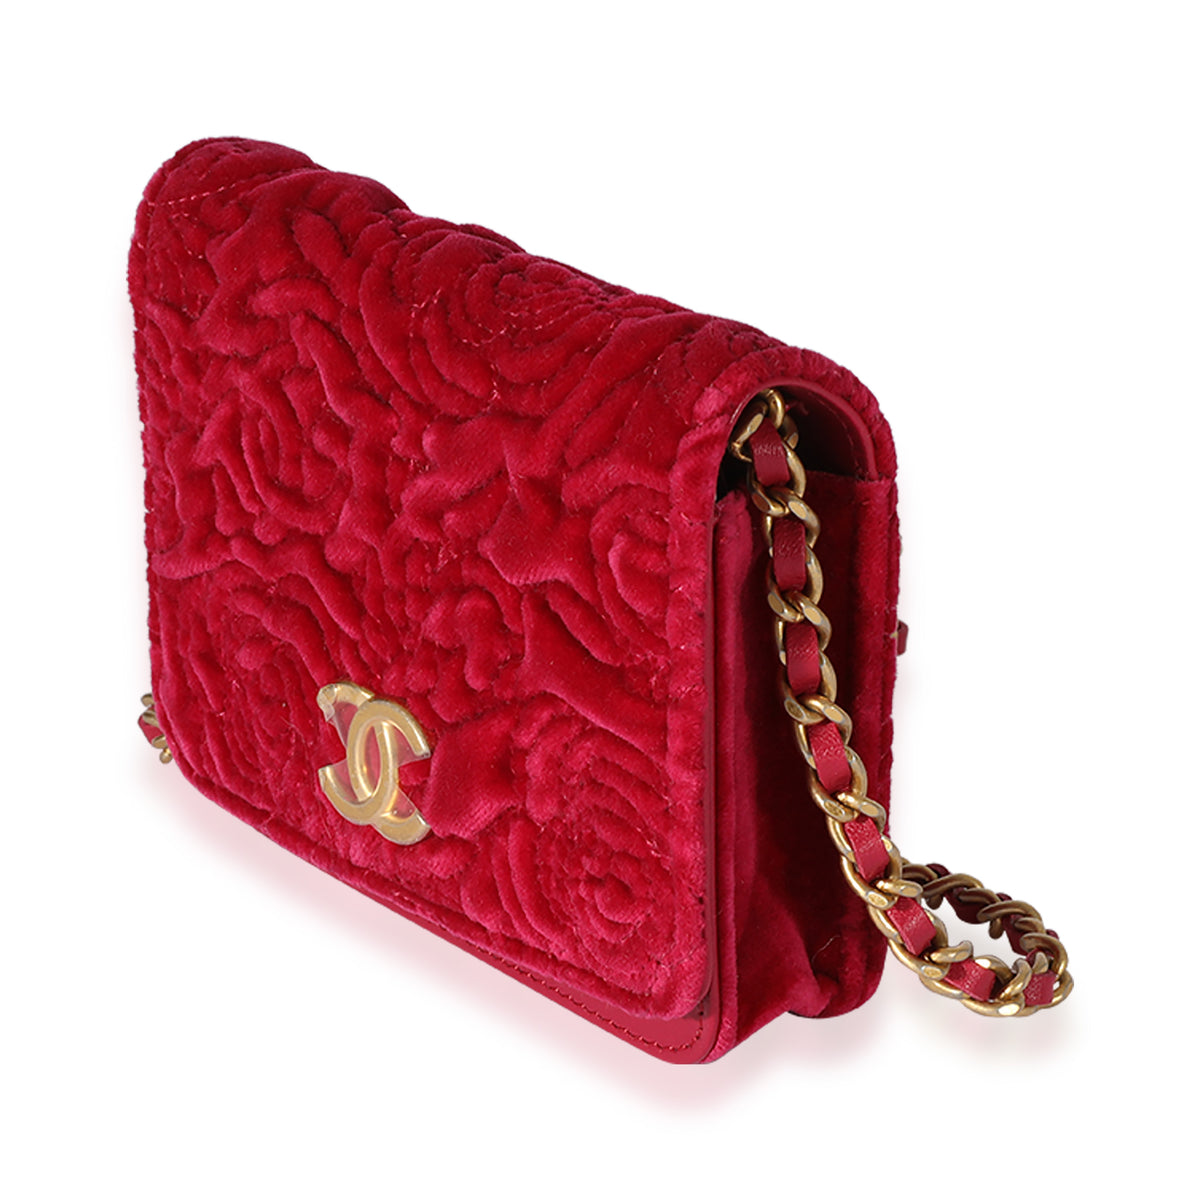 Chanel Fuchsia Quilted Leather Chain CC Flap Coin Purse Chanel